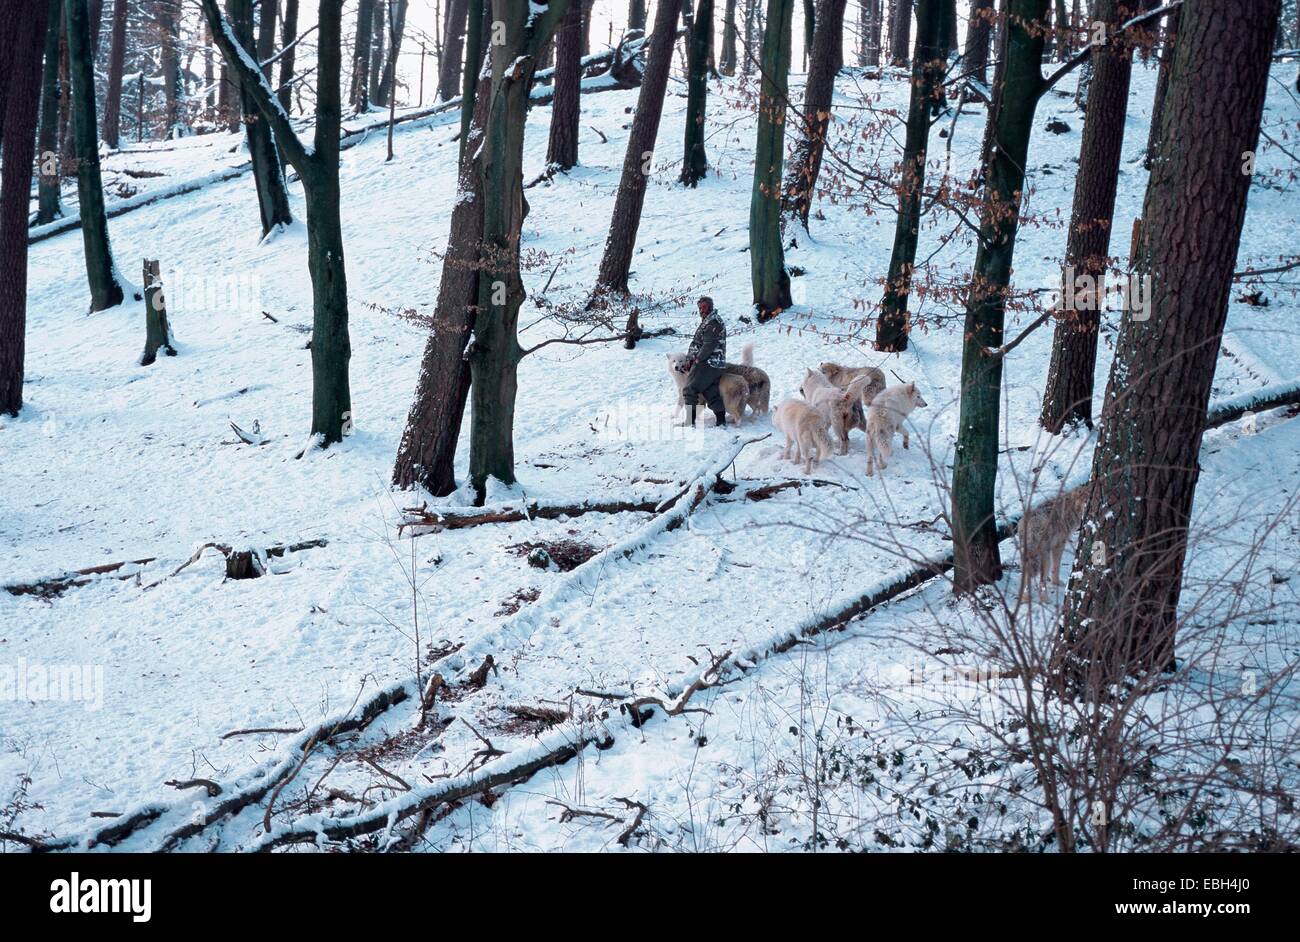 arctic wolf; tundra wolf (Canis lupus albus); pack with Werner Freund in snow; Germany; Saarland; Merzig. Stock Photo